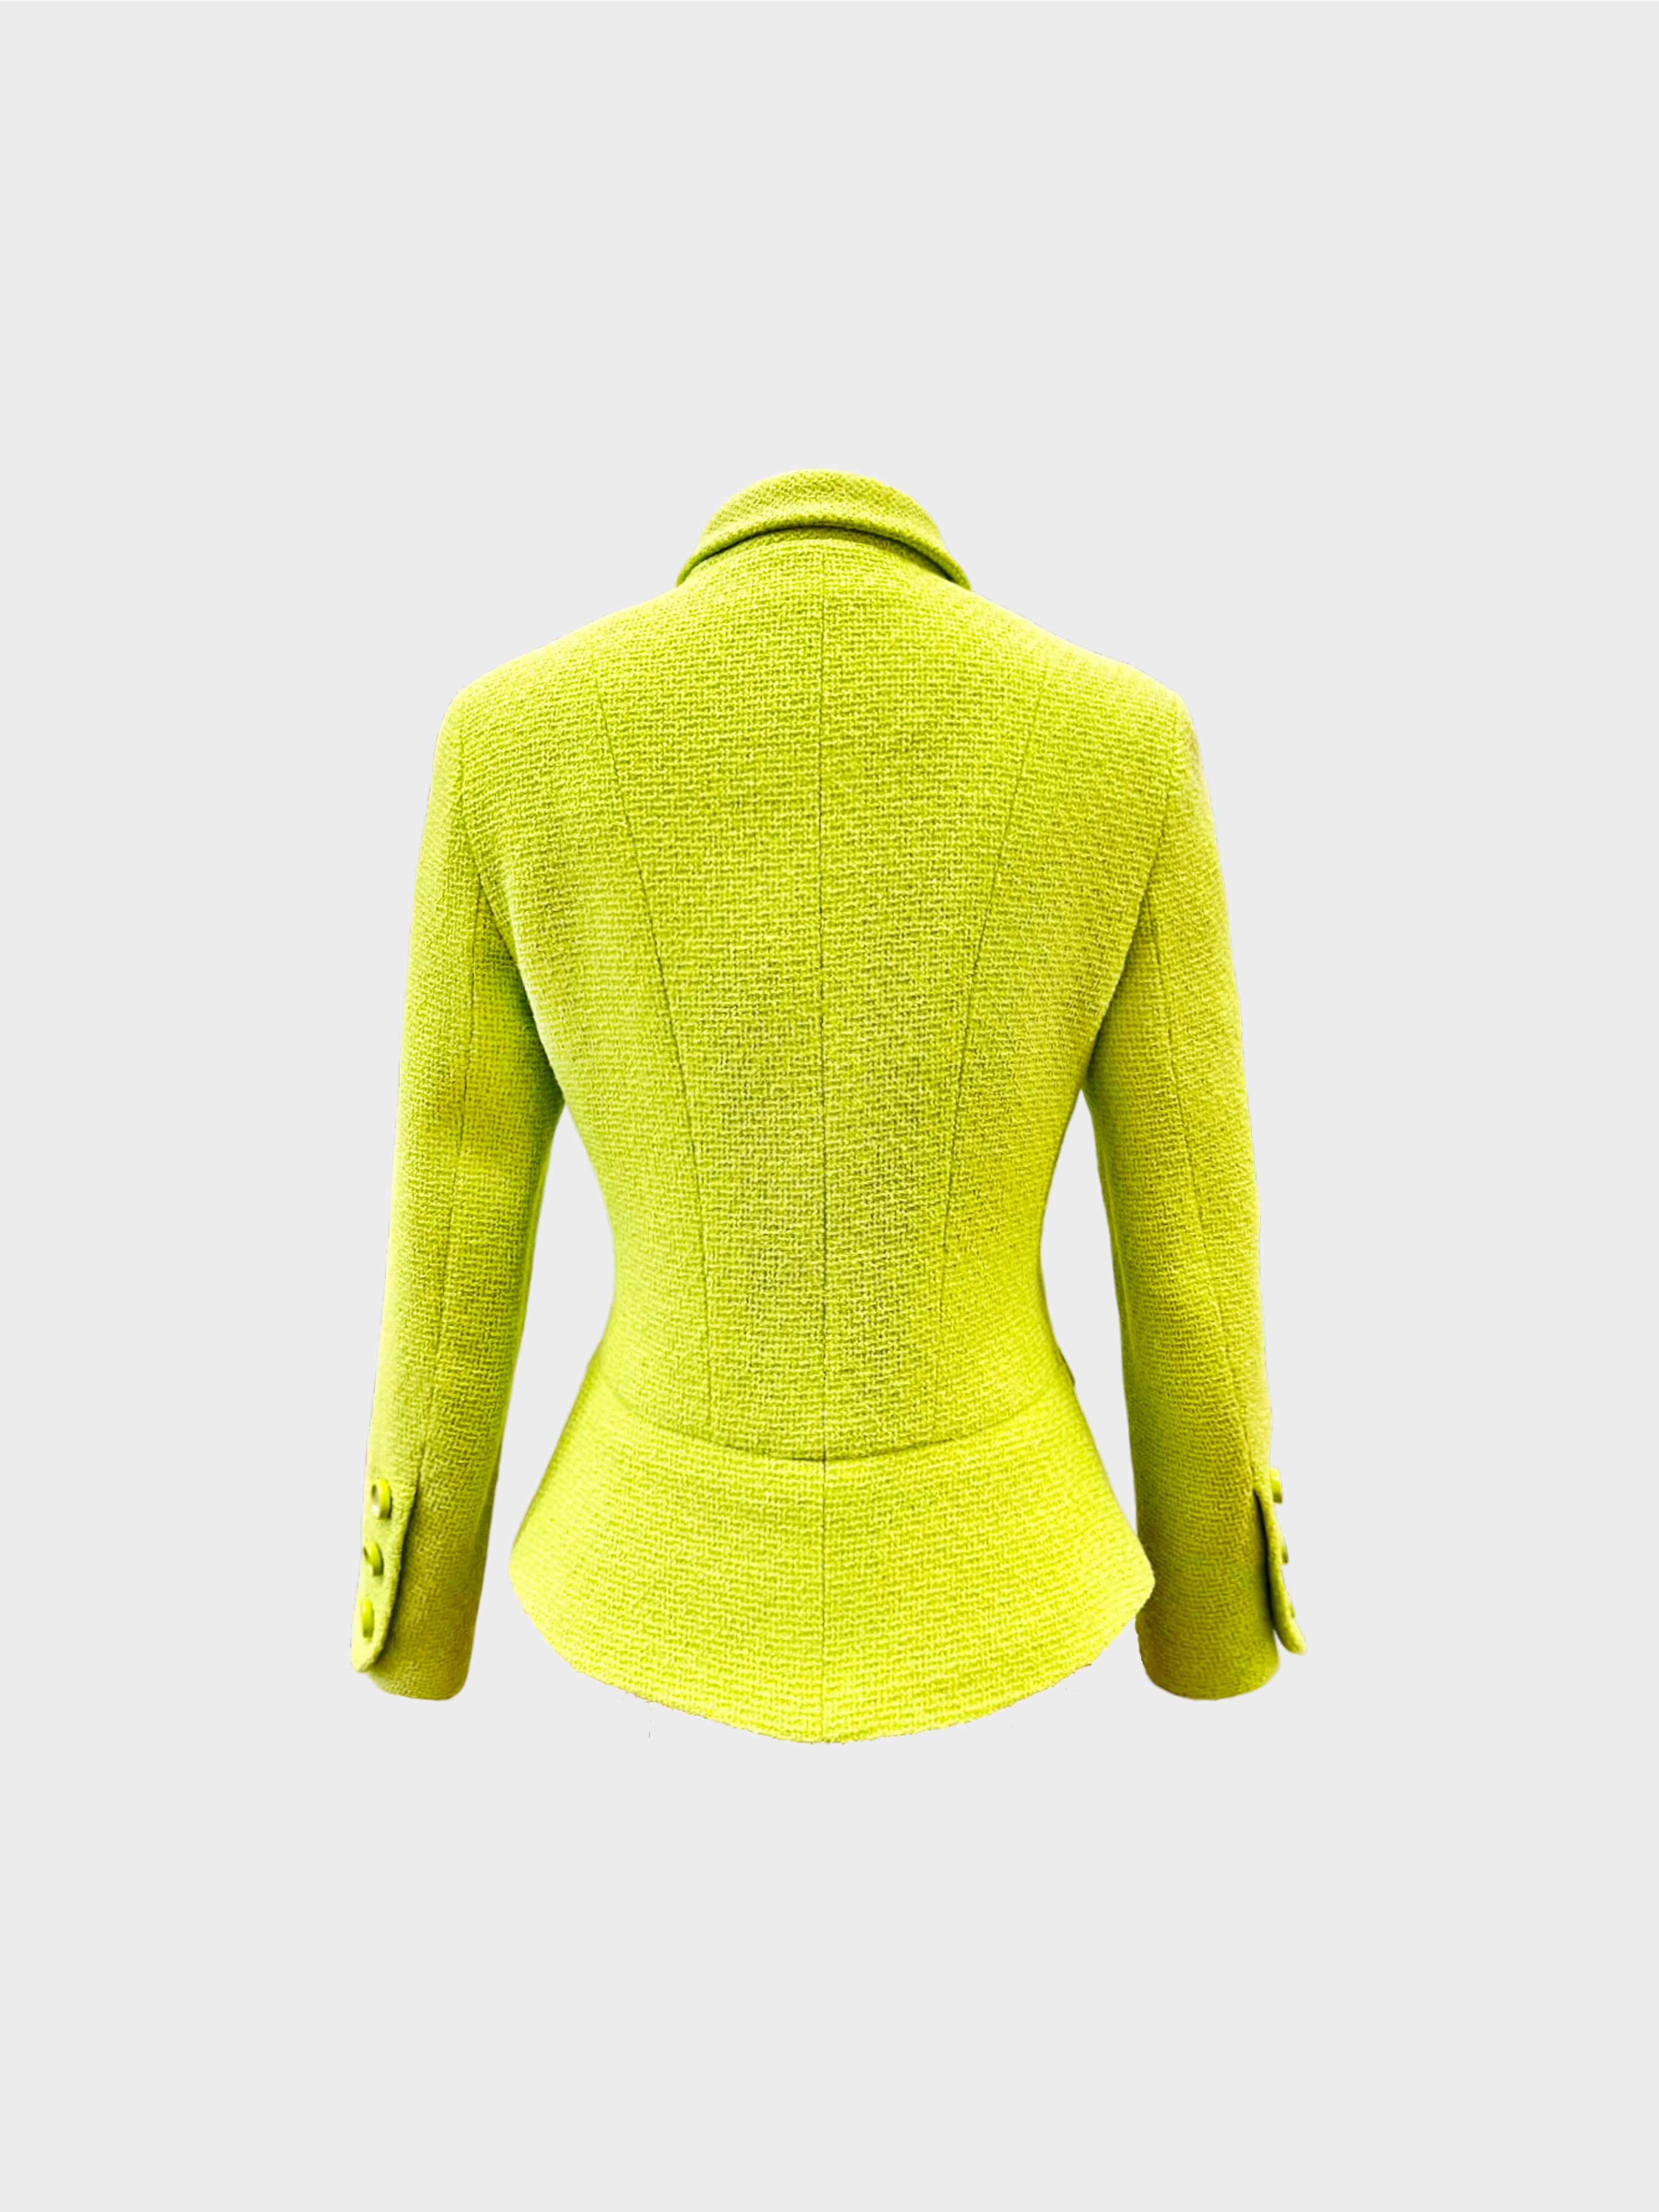 Chanel 1995 Lime Green Blazer with Mirror Buttons